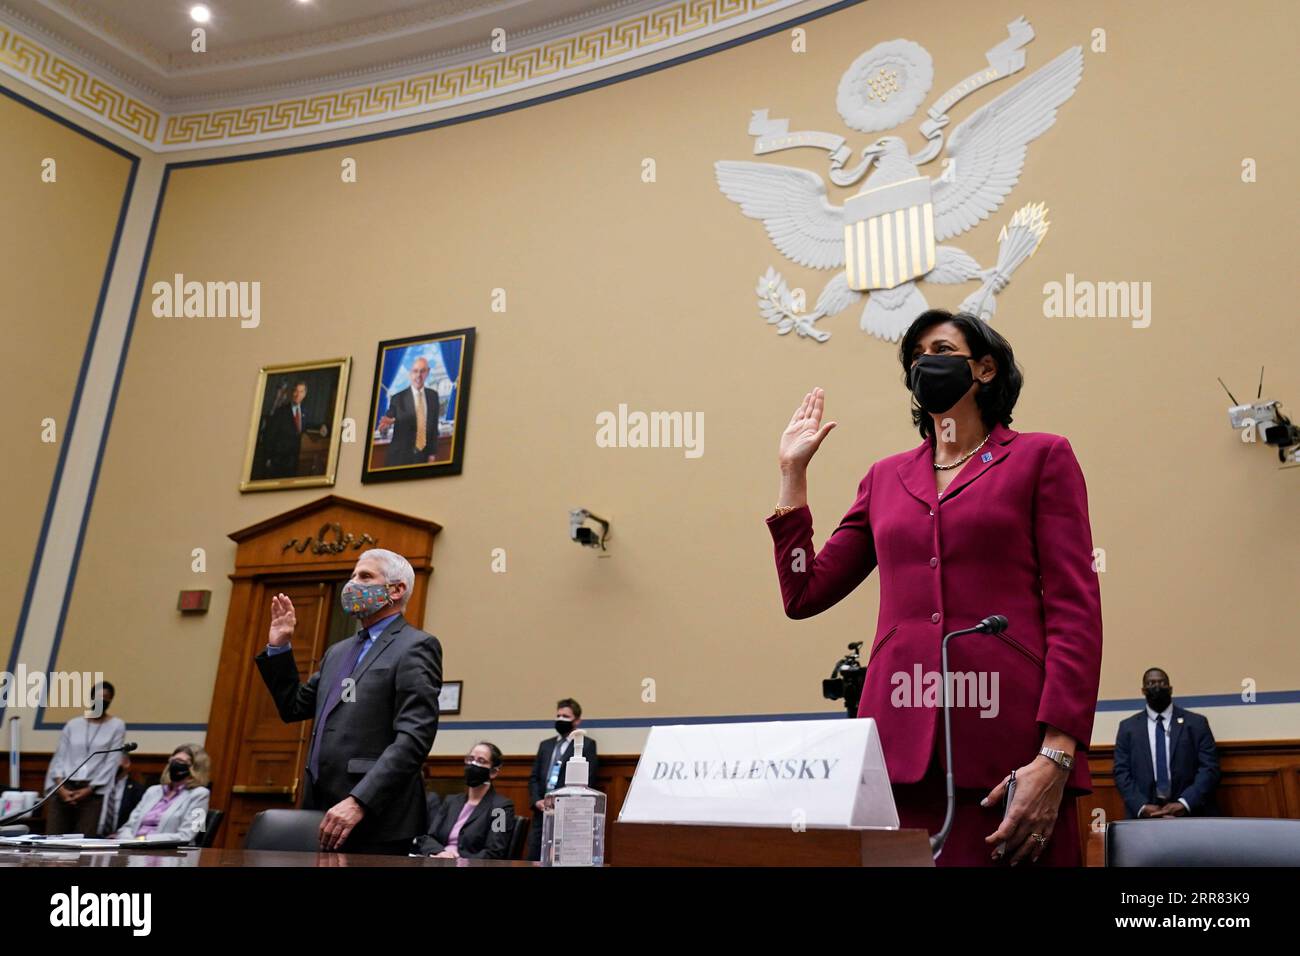 210415 -- WASHINGTON, April 15, 2021 -- Rochelle Walensky R, director of the U.S. Centers for Disease Control and Prevention CDC, is sworn in before testifying at a hearing of U.S. House Select Subcommittee on the Coronavirus Crisis in Washington, D.C., the United States, on April 15, 2021.  via Xinhua U.S.-WASHINGTON, D.C.-HEARING-COVID-19 SusanxWalsh/Pool PUBLICATIONxNOTxINxCHN Stock Photo